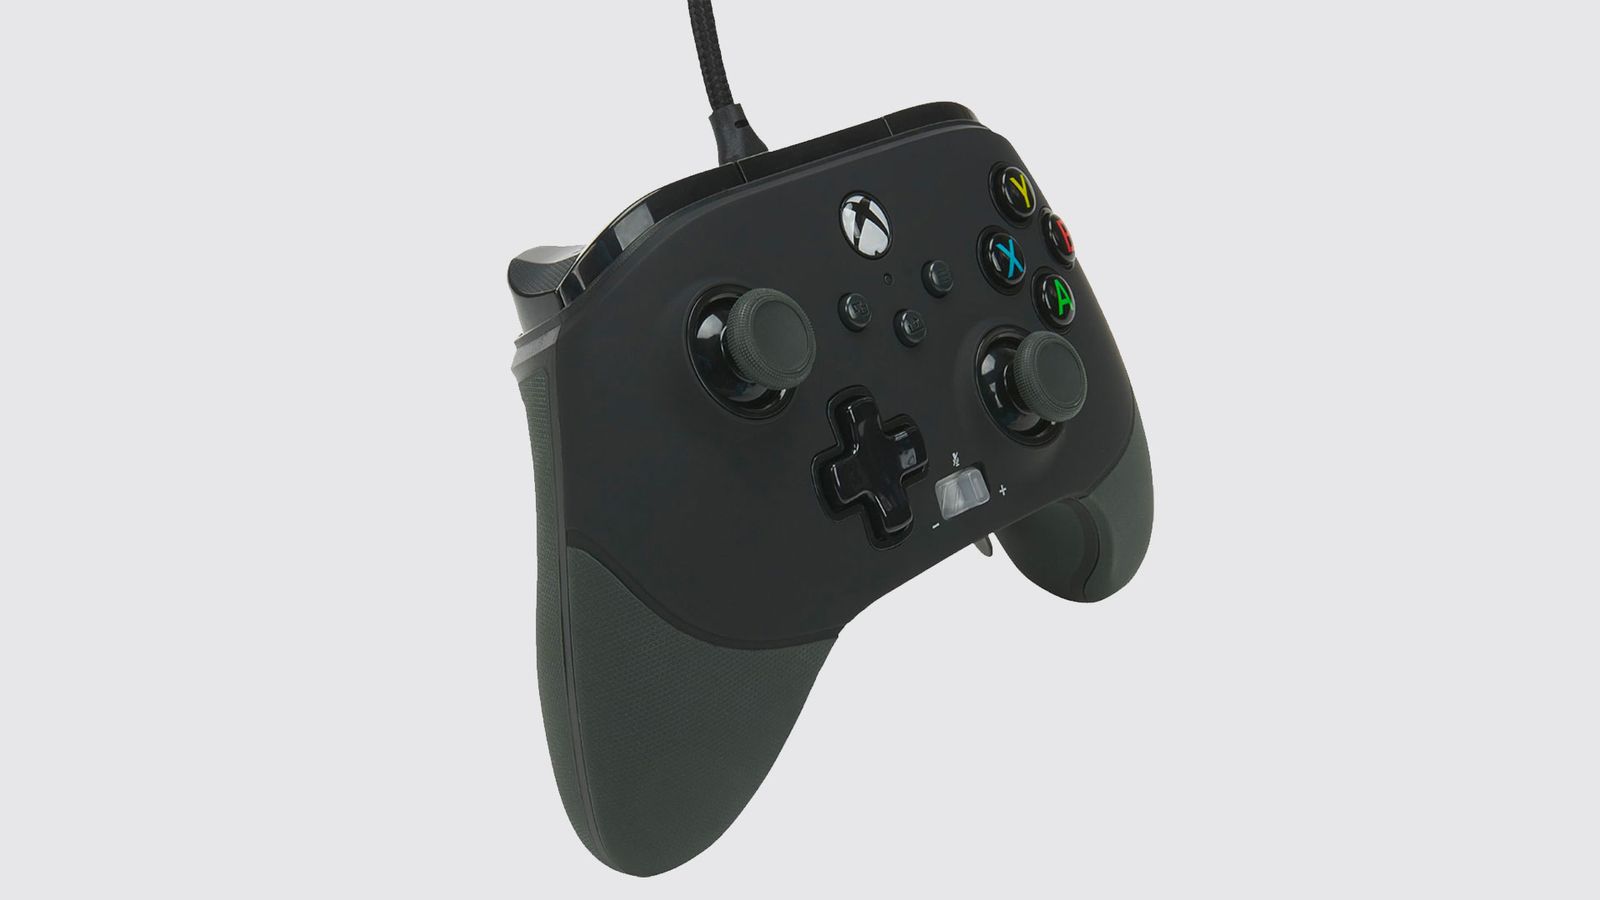 PowerA FUSION Pro 2 product image of a black Xbox-style controller.